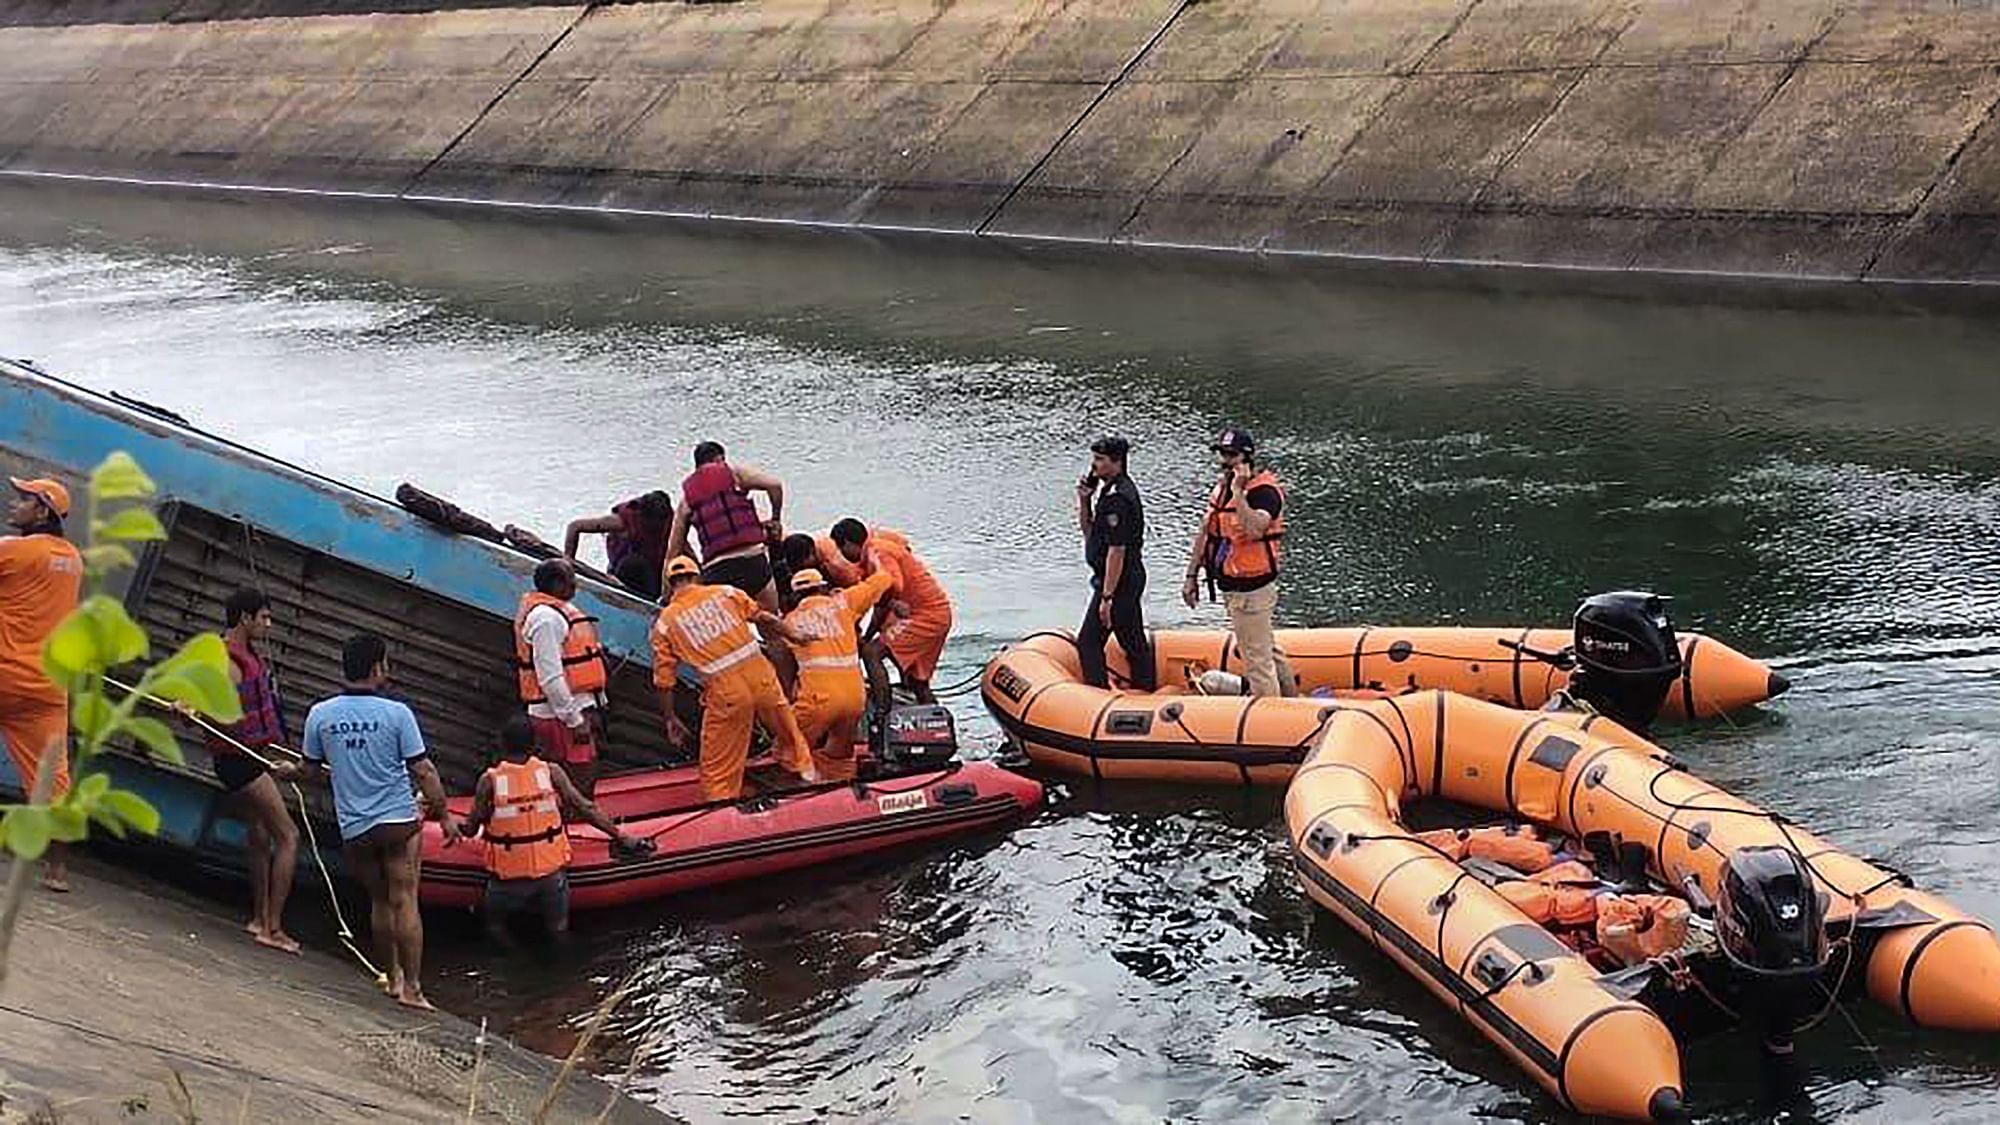 NDRF team carries out rescue operation after an overcrowded bus plunged into a canal in Sidhi district of Madhya Pradesh, on Tuesday, 16 February.